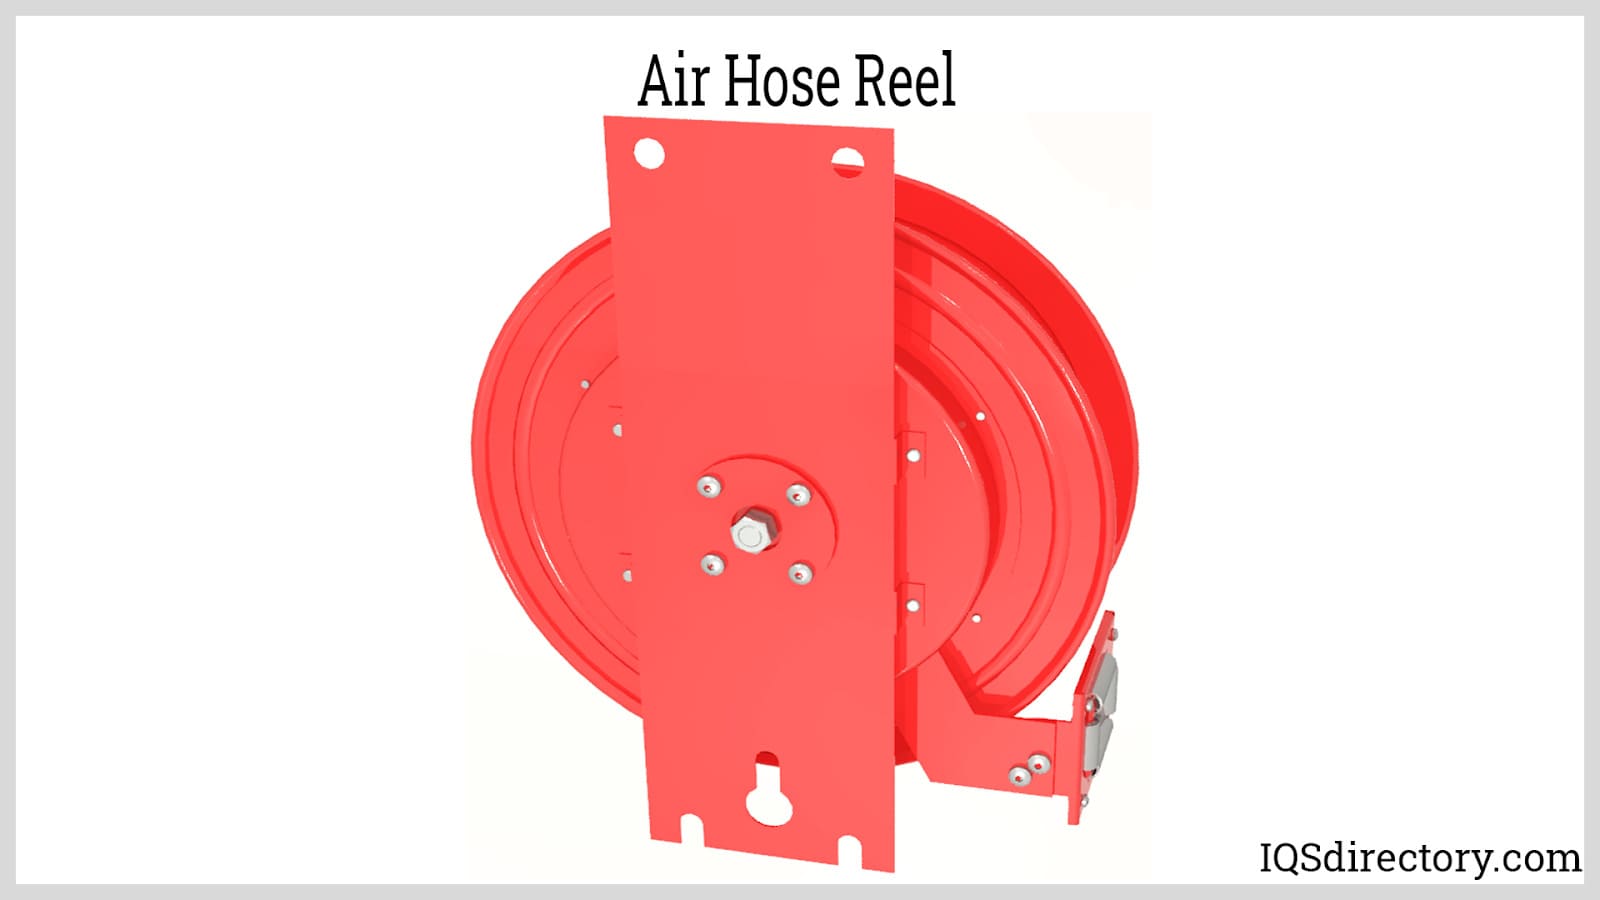 Use of using a Hose Reel